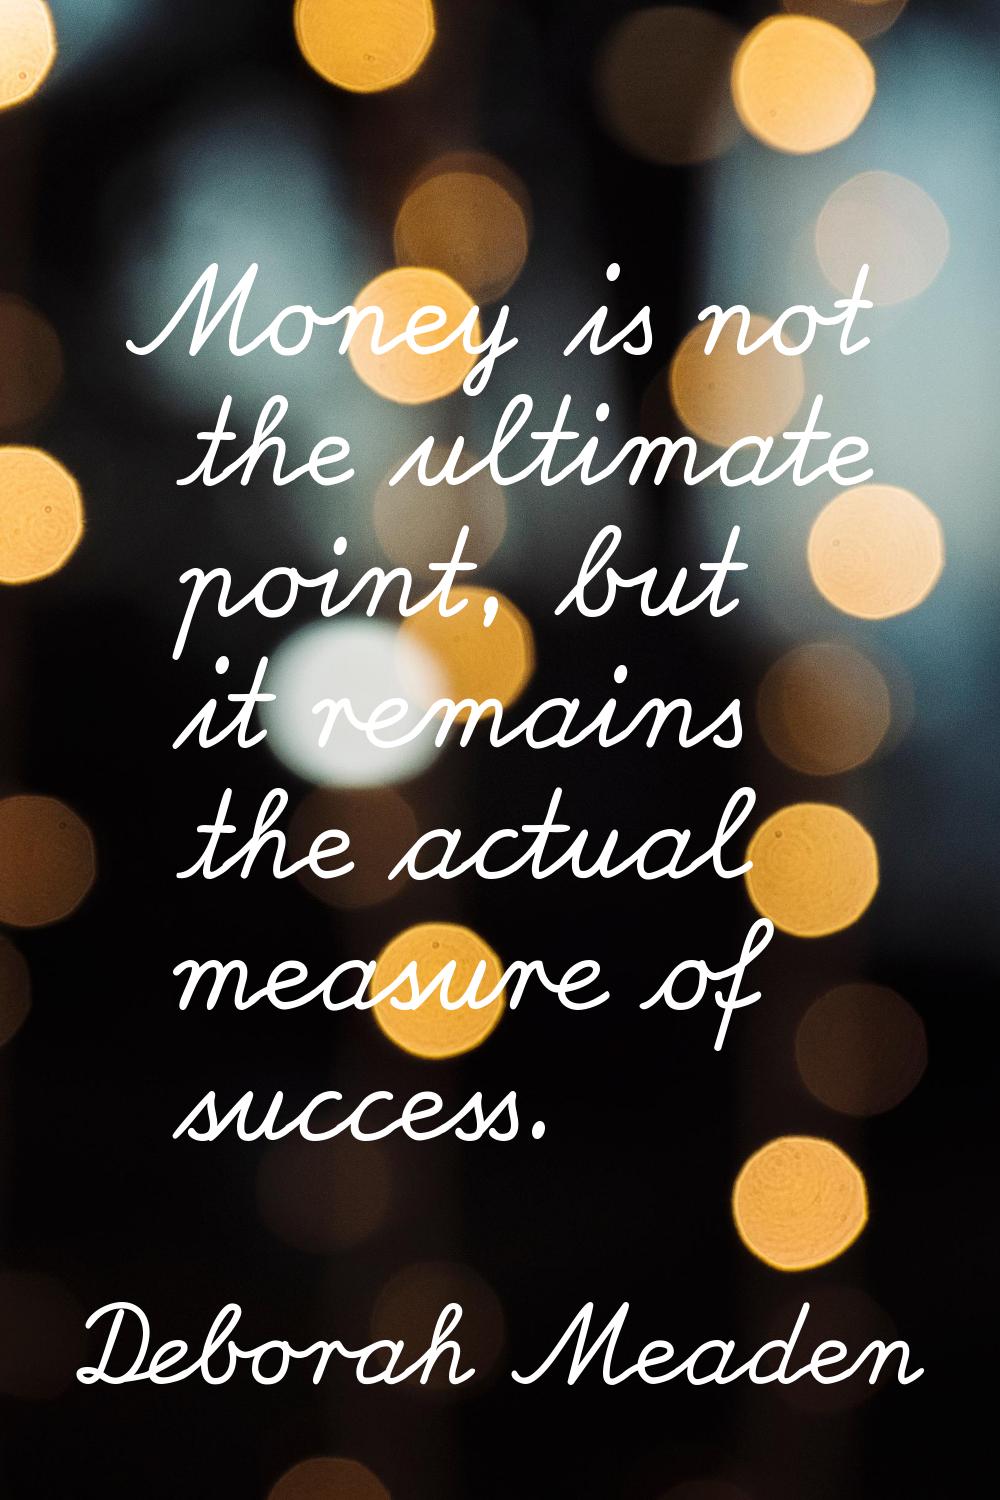 Money is not the ultimate point, but it remains the actual measure of success.